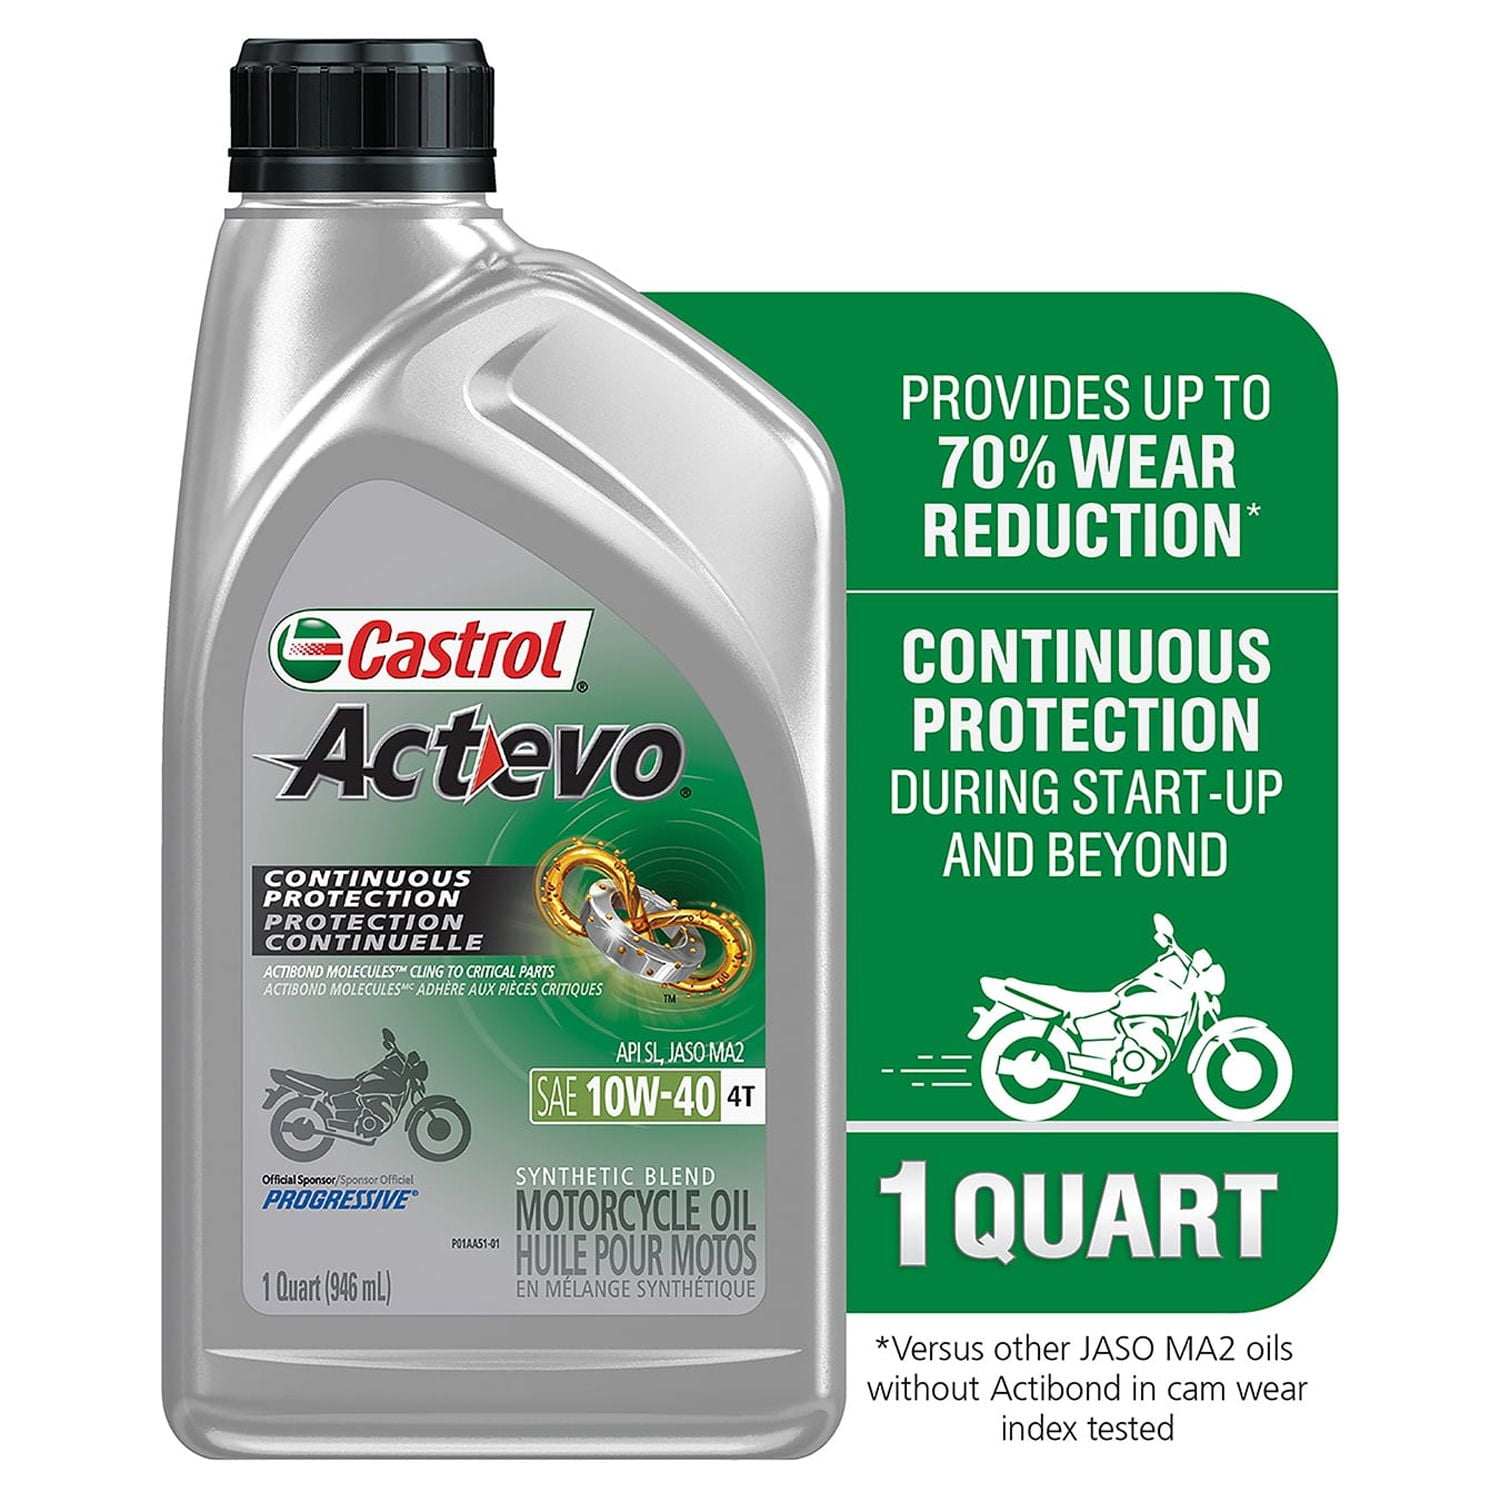 Castrol Actevo 4T 10W-40 Part Synthetic Motorcycle Oil, 1 Quart 